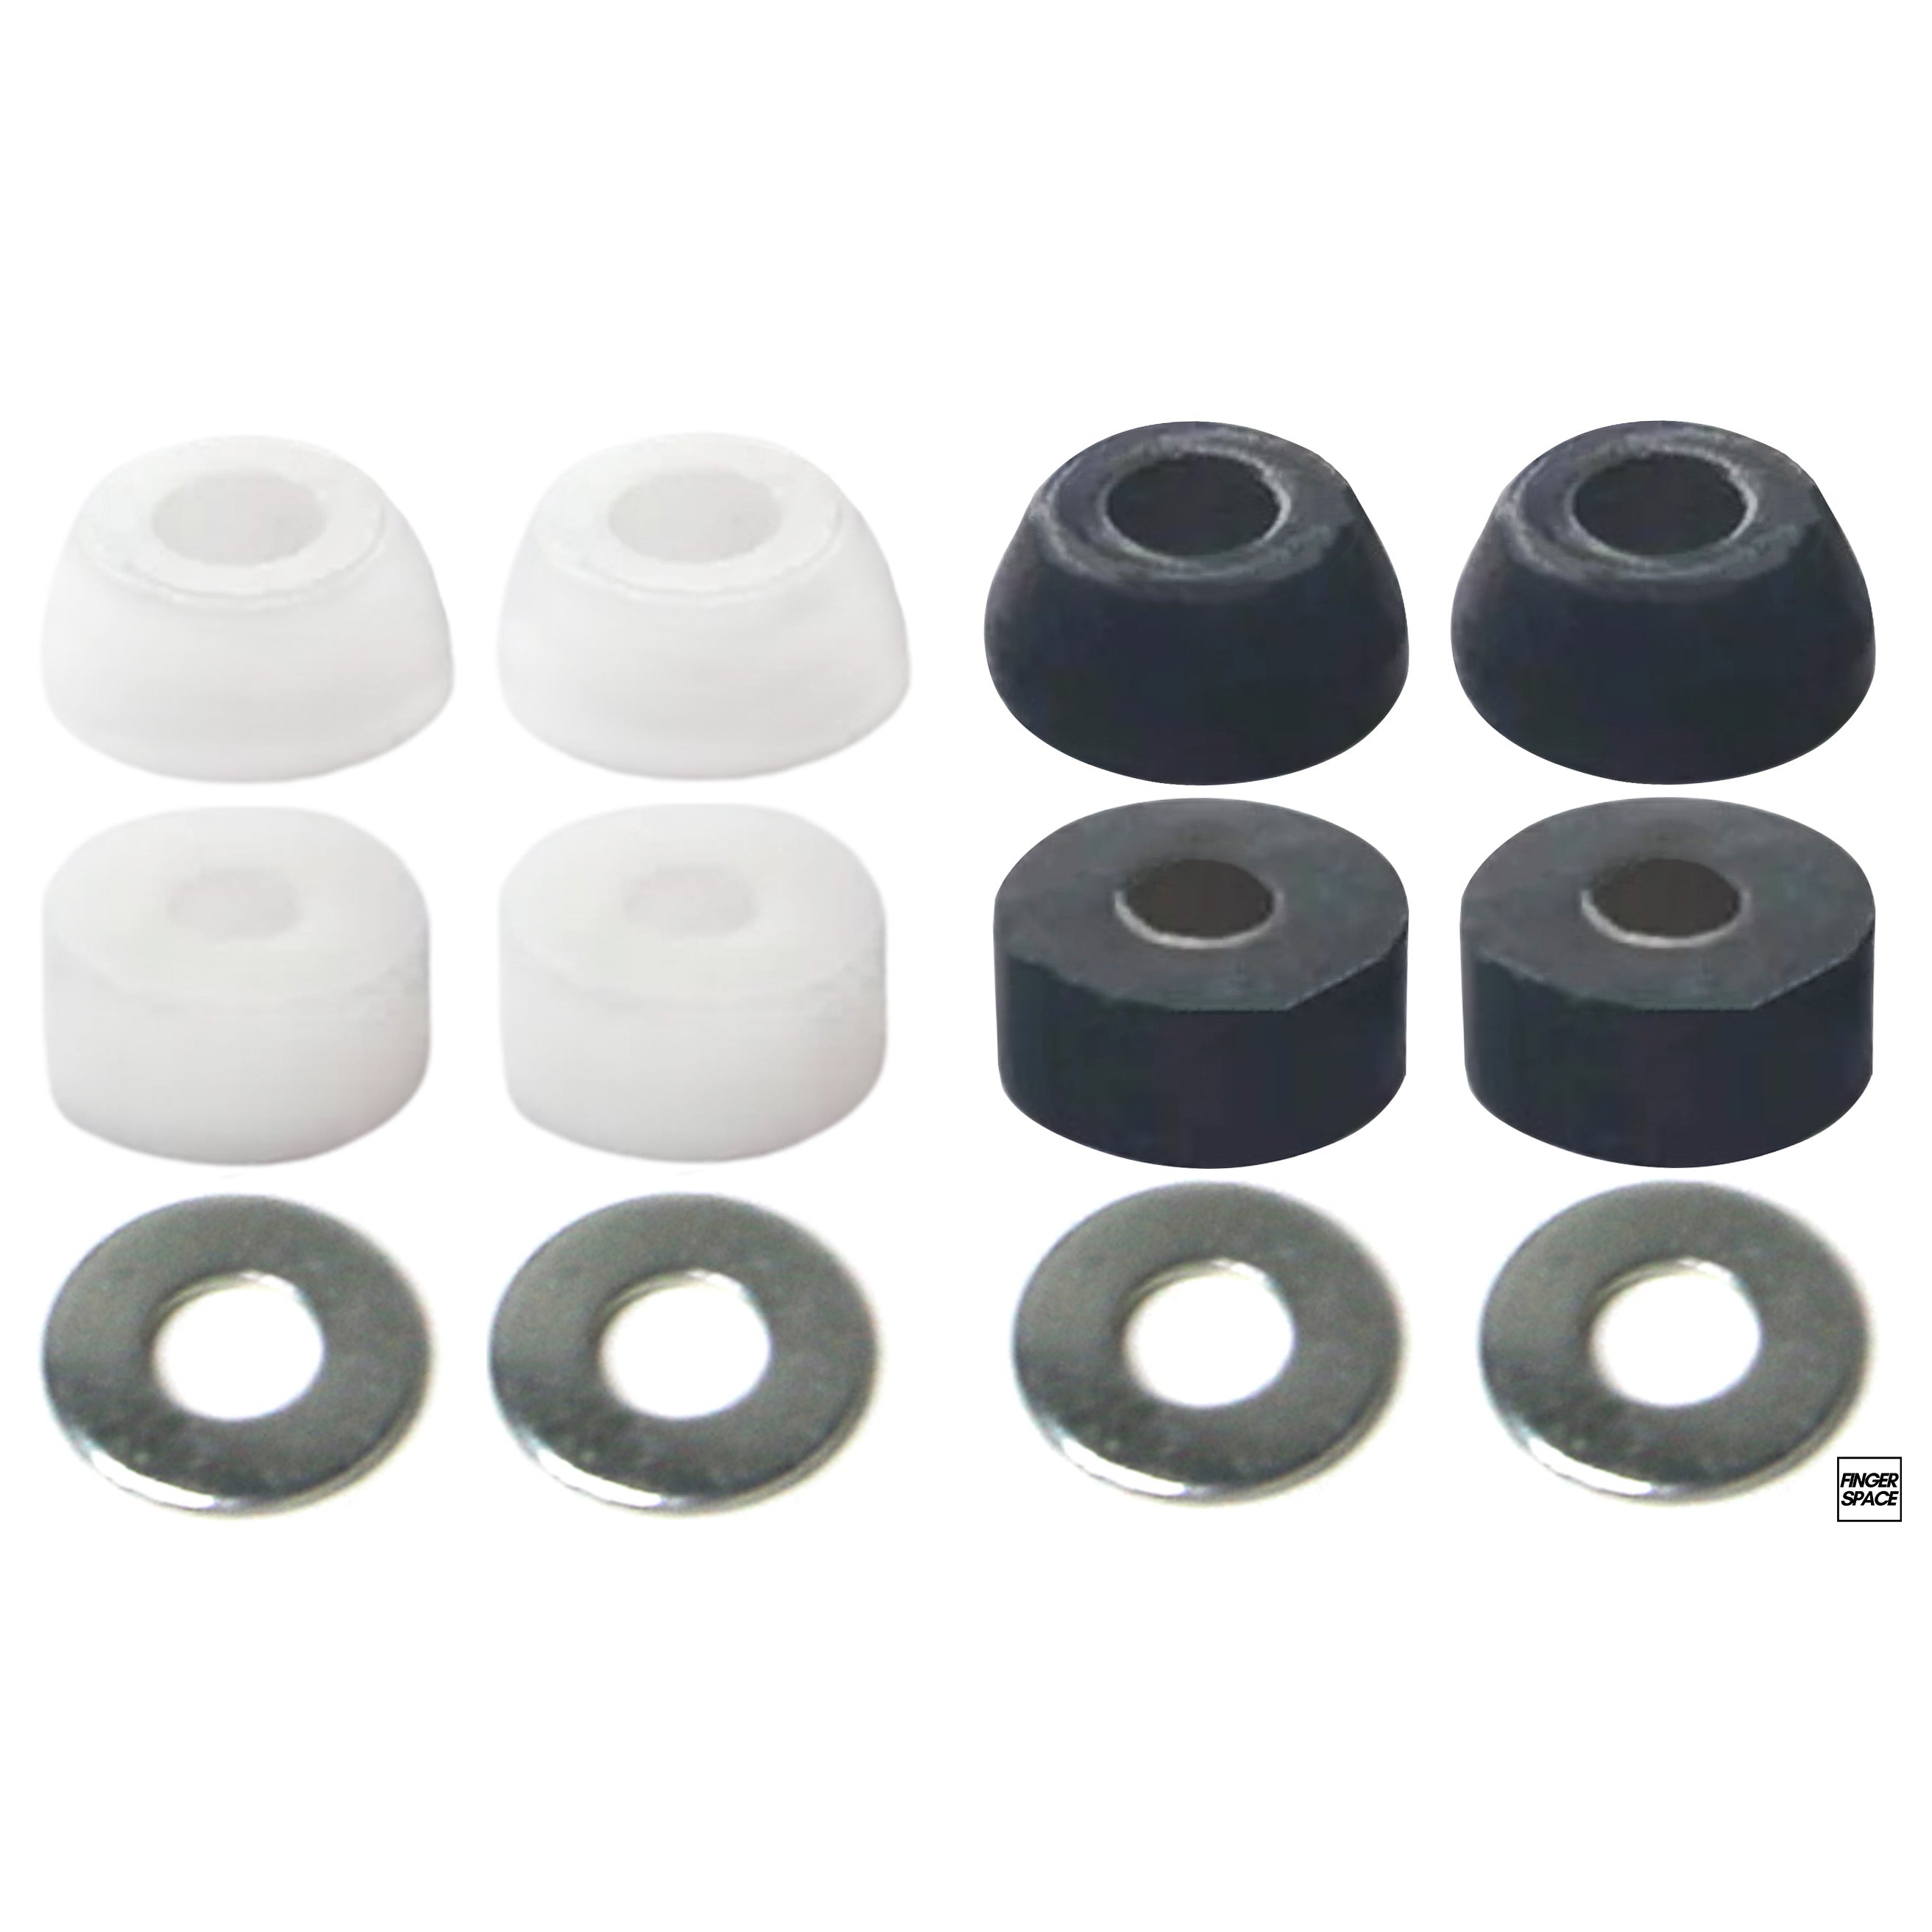 Professional Polyurethane Fingerboard Bushings (70A and 90A Durometers)